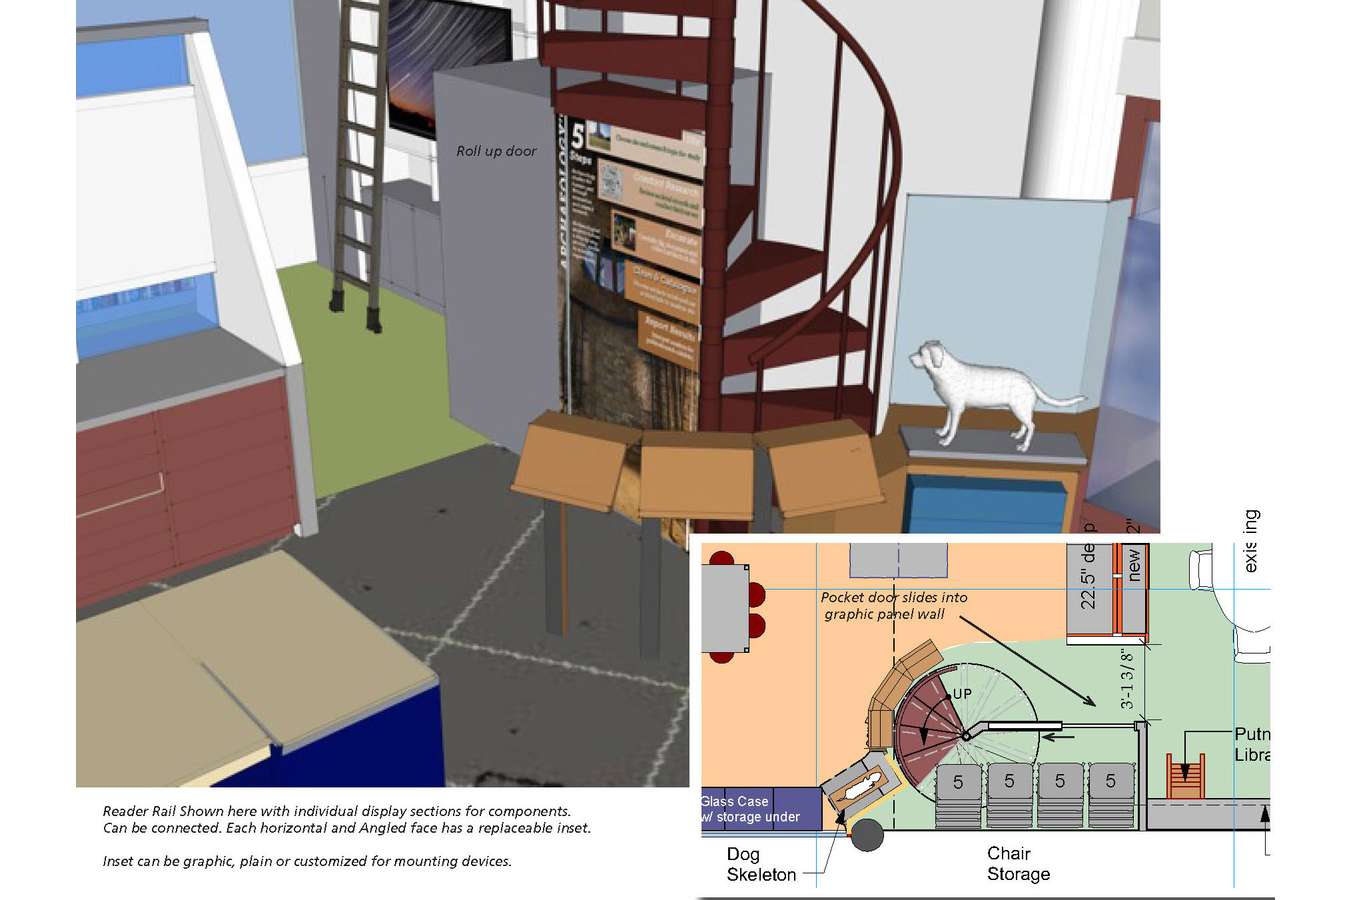 6 CAAM stair view : Spiral stairway access to staff offices, surrounded with display and storage areas 